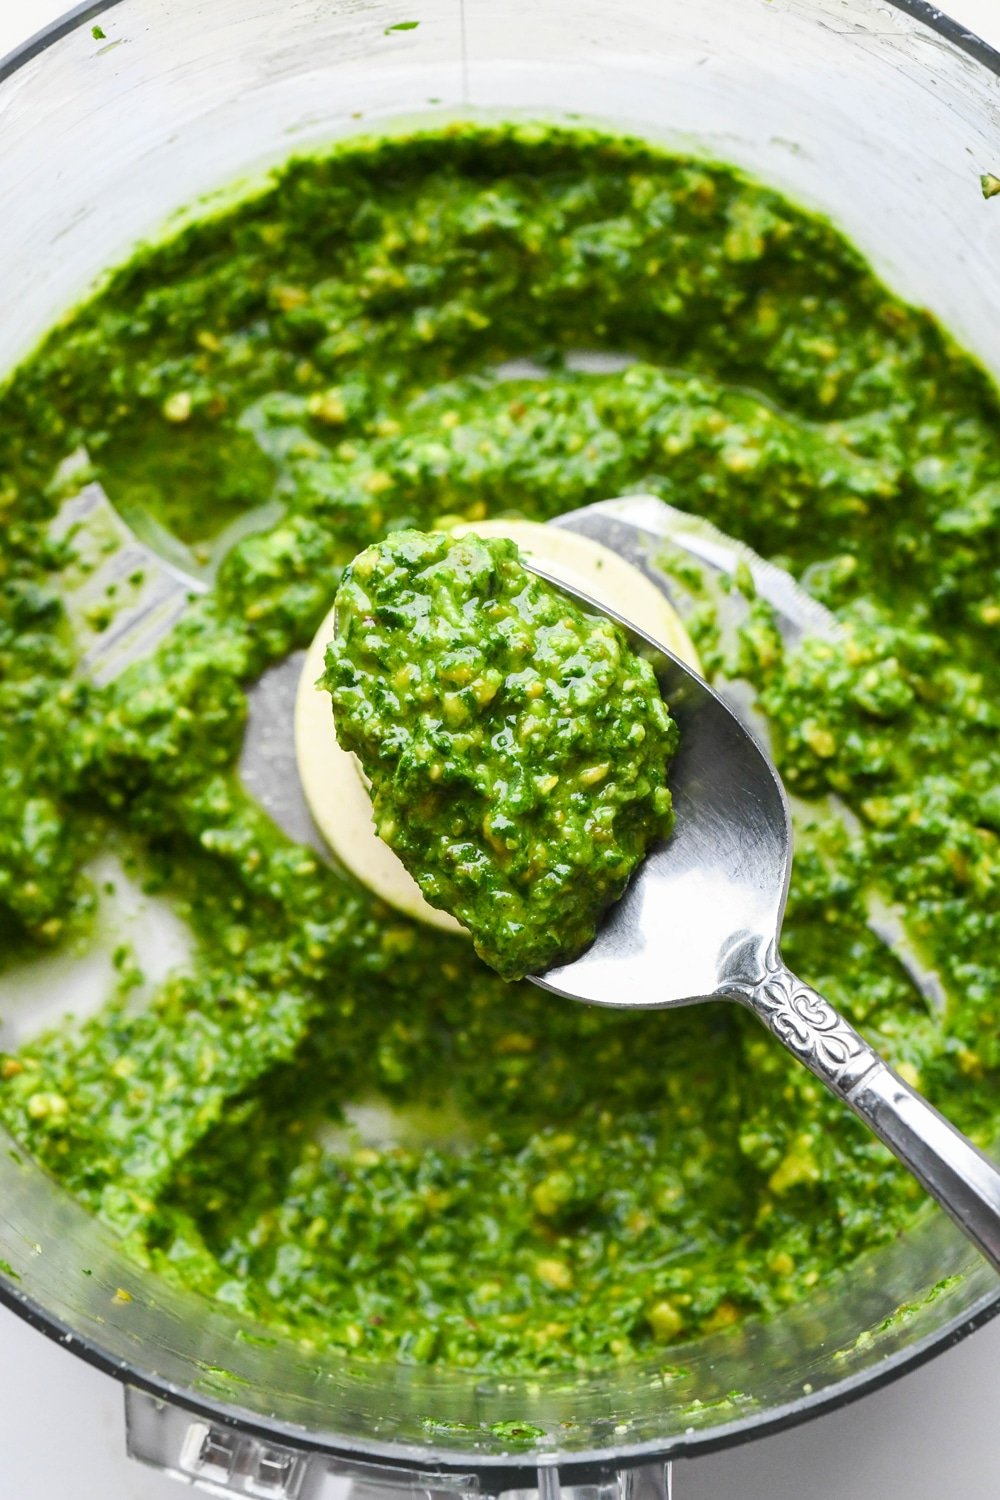 How to make pistachio pesto: A spoon lifting out a spoonful of creamy pesto in food processor container after adding olive oil.